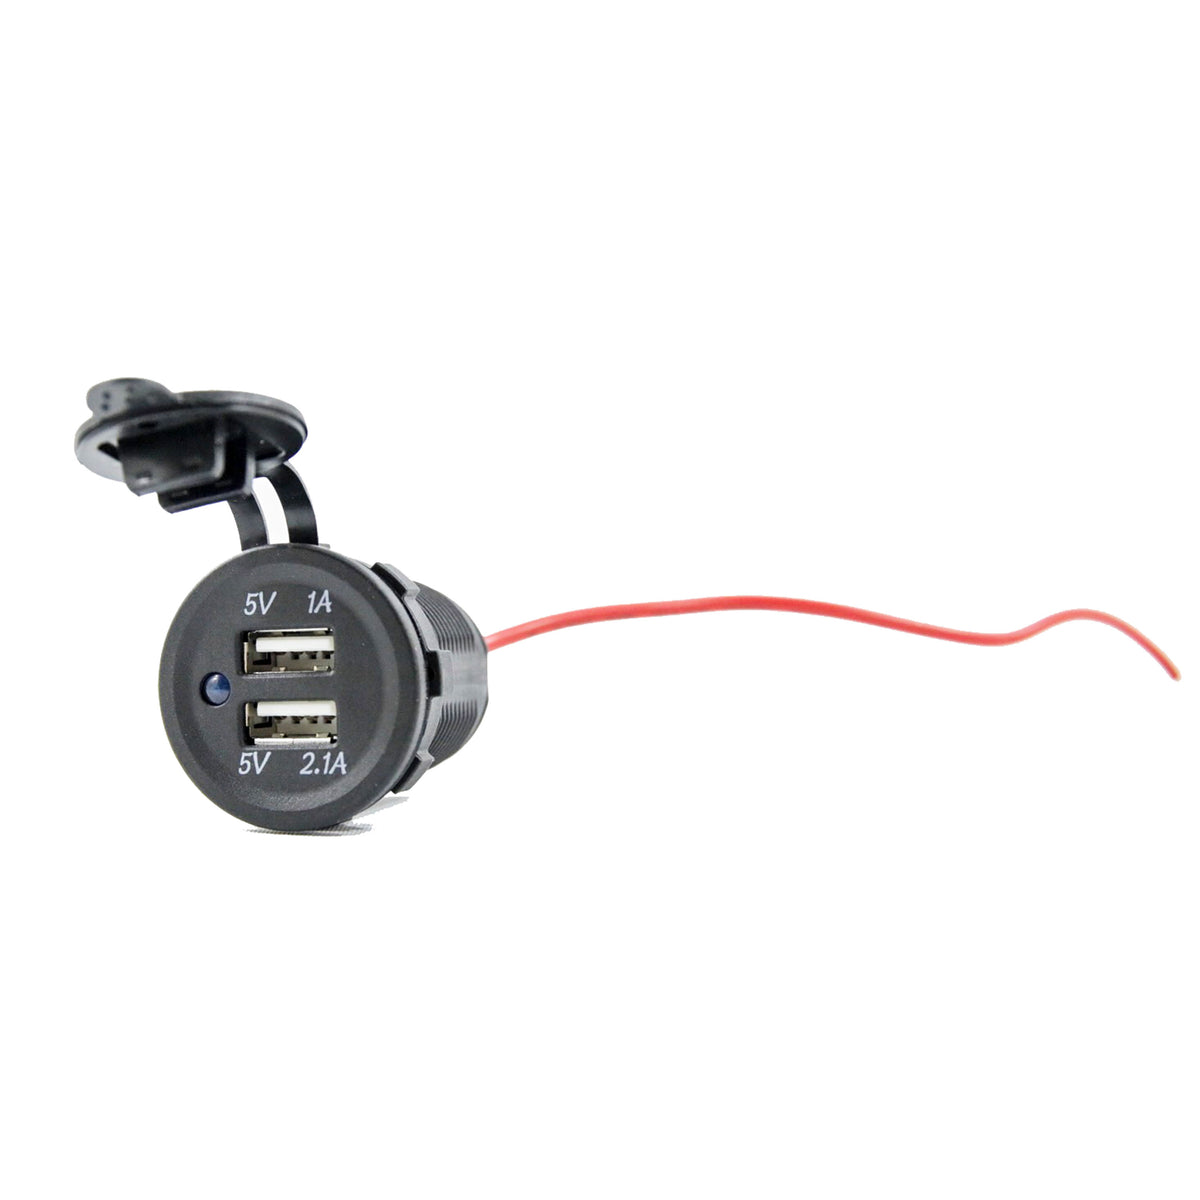 T-H Marine DUSB-2-DP Dual USB Outlet with Blue LED